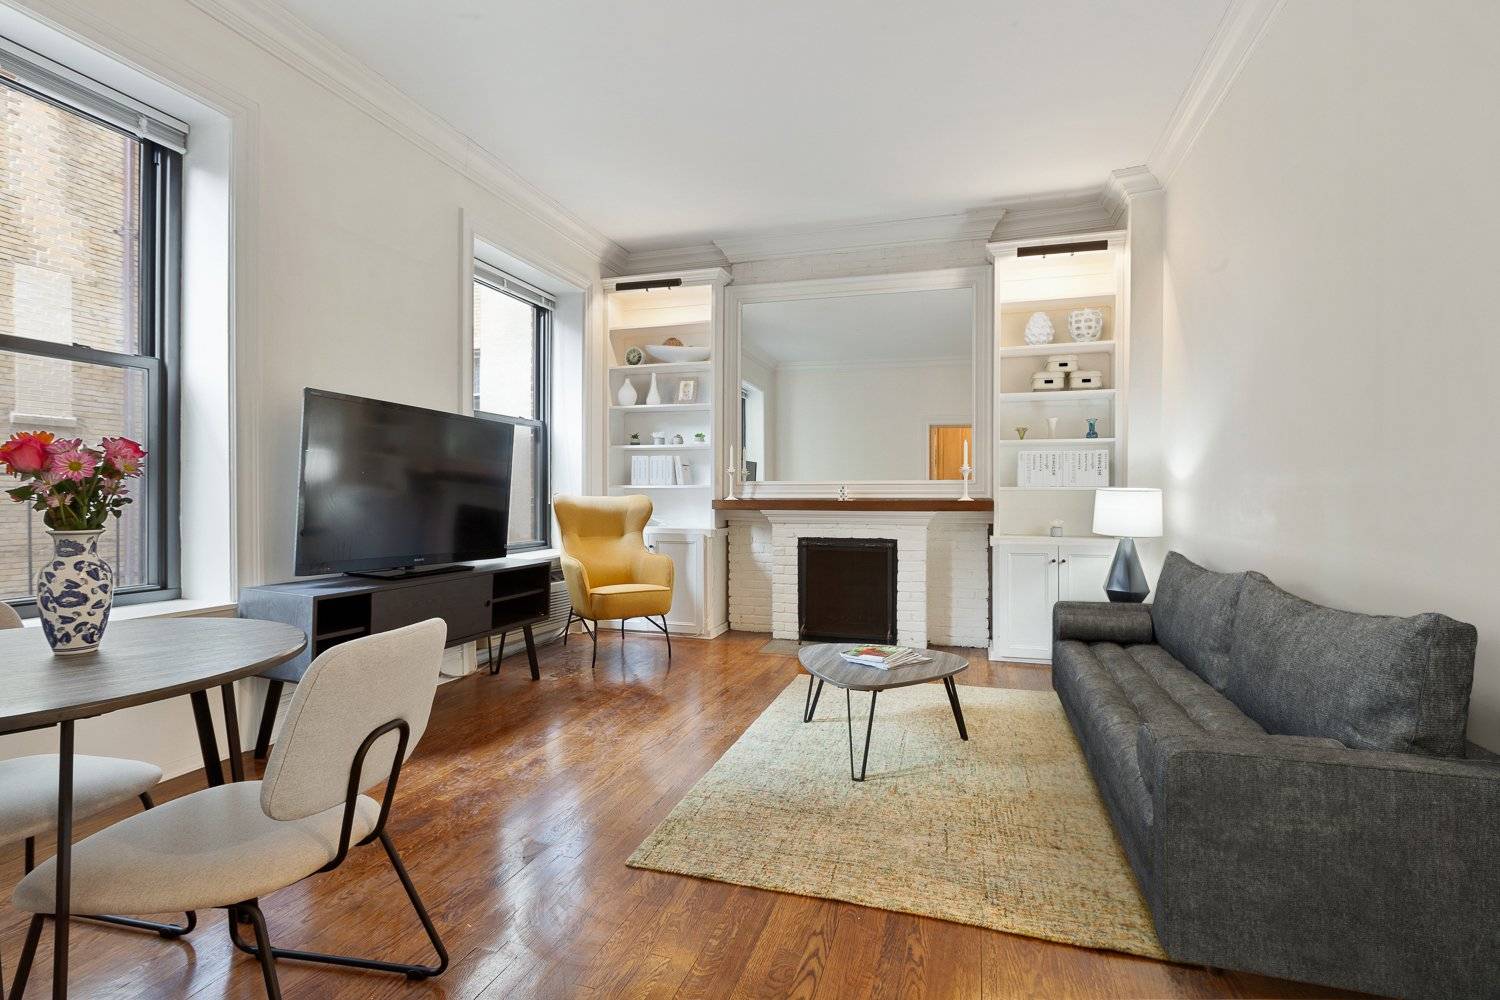 Discover picture perfect living in this beautiful one bedroom apartment located on the elegant and tree lined East 65 Street.